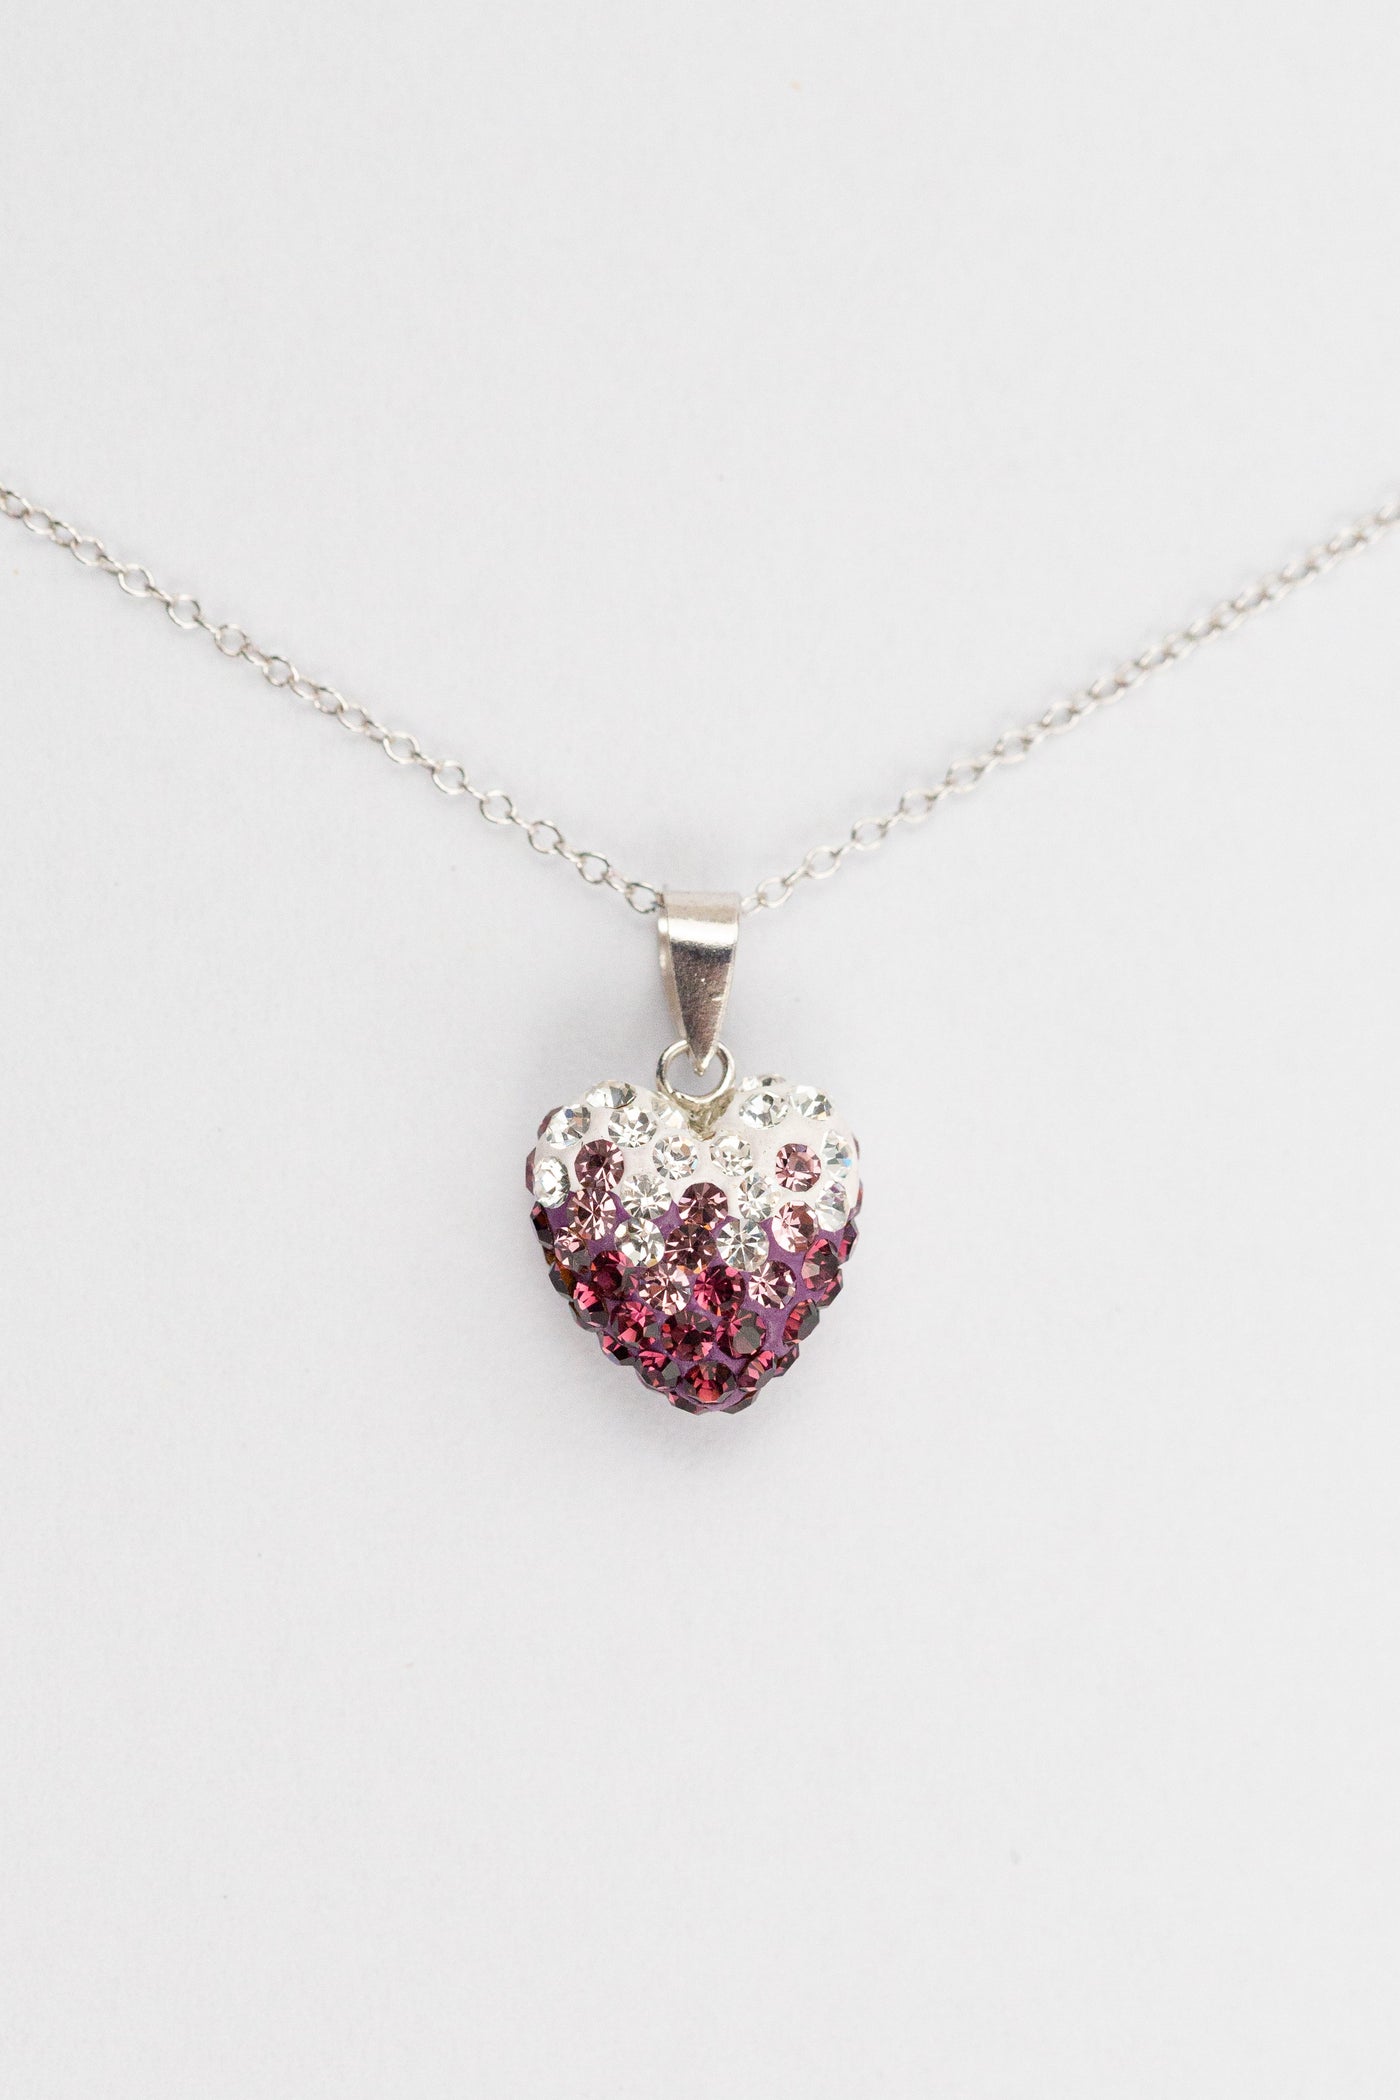 Ombre Heart Pattern Silver Crystal Necklace in Amethyst | Annie and Sisters